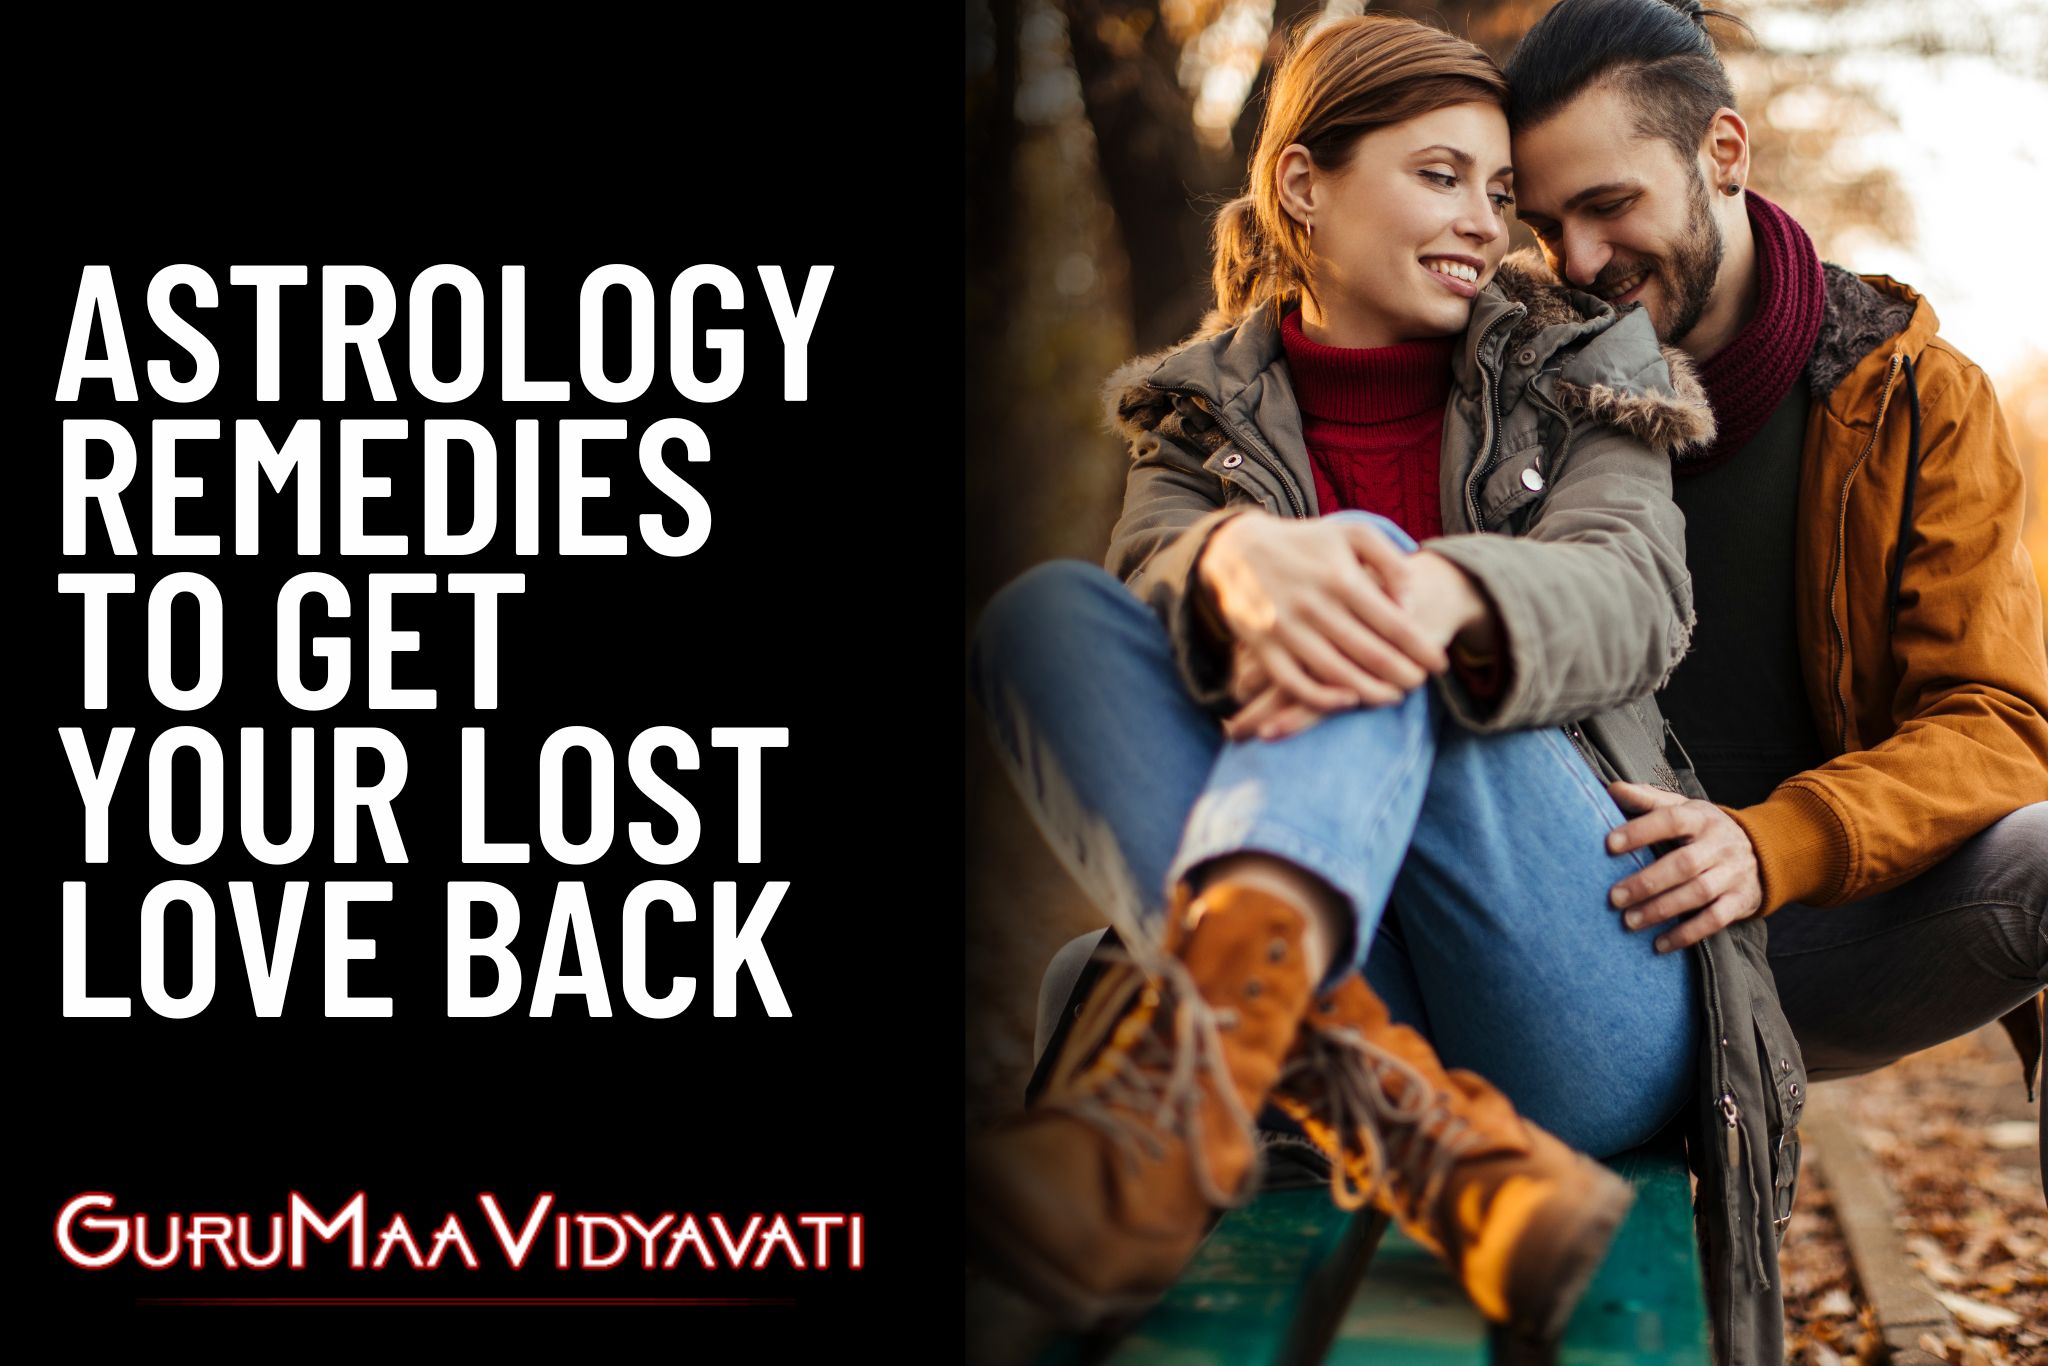 Follow These Astrology Remedies to Get Your Lost Love Back